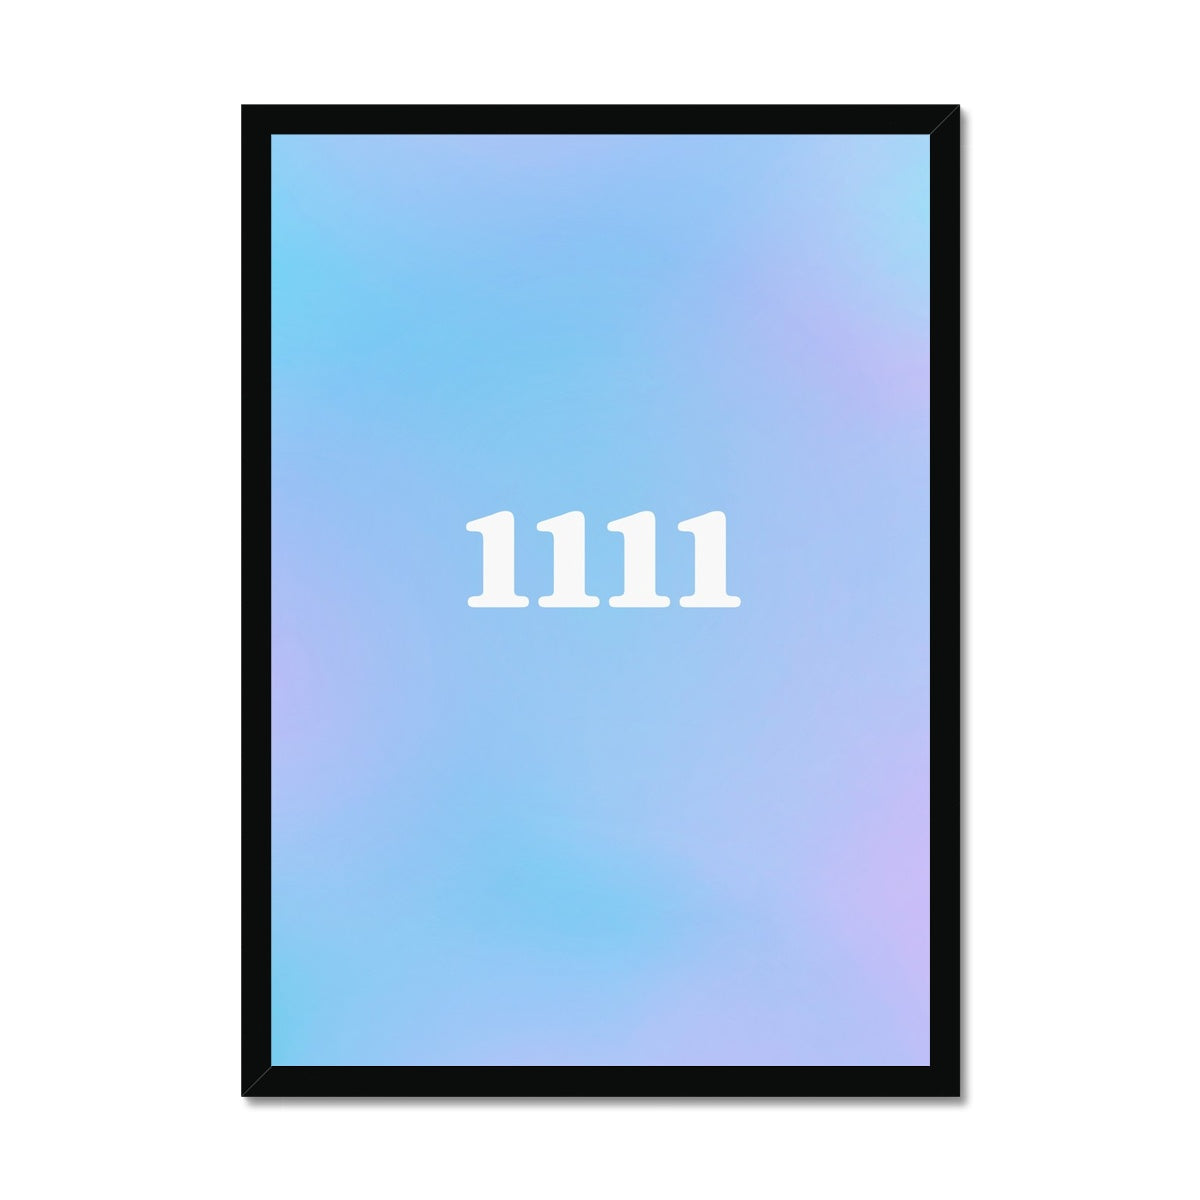 An angel number art print with a gradient aura. Add a touch of angel energy to your walls with a angel number auras. The perfect wall art posters to create a soft and dreamy aesthetic with your apartment or dorm decor. 1111 Magic Hour: Make A Wish.